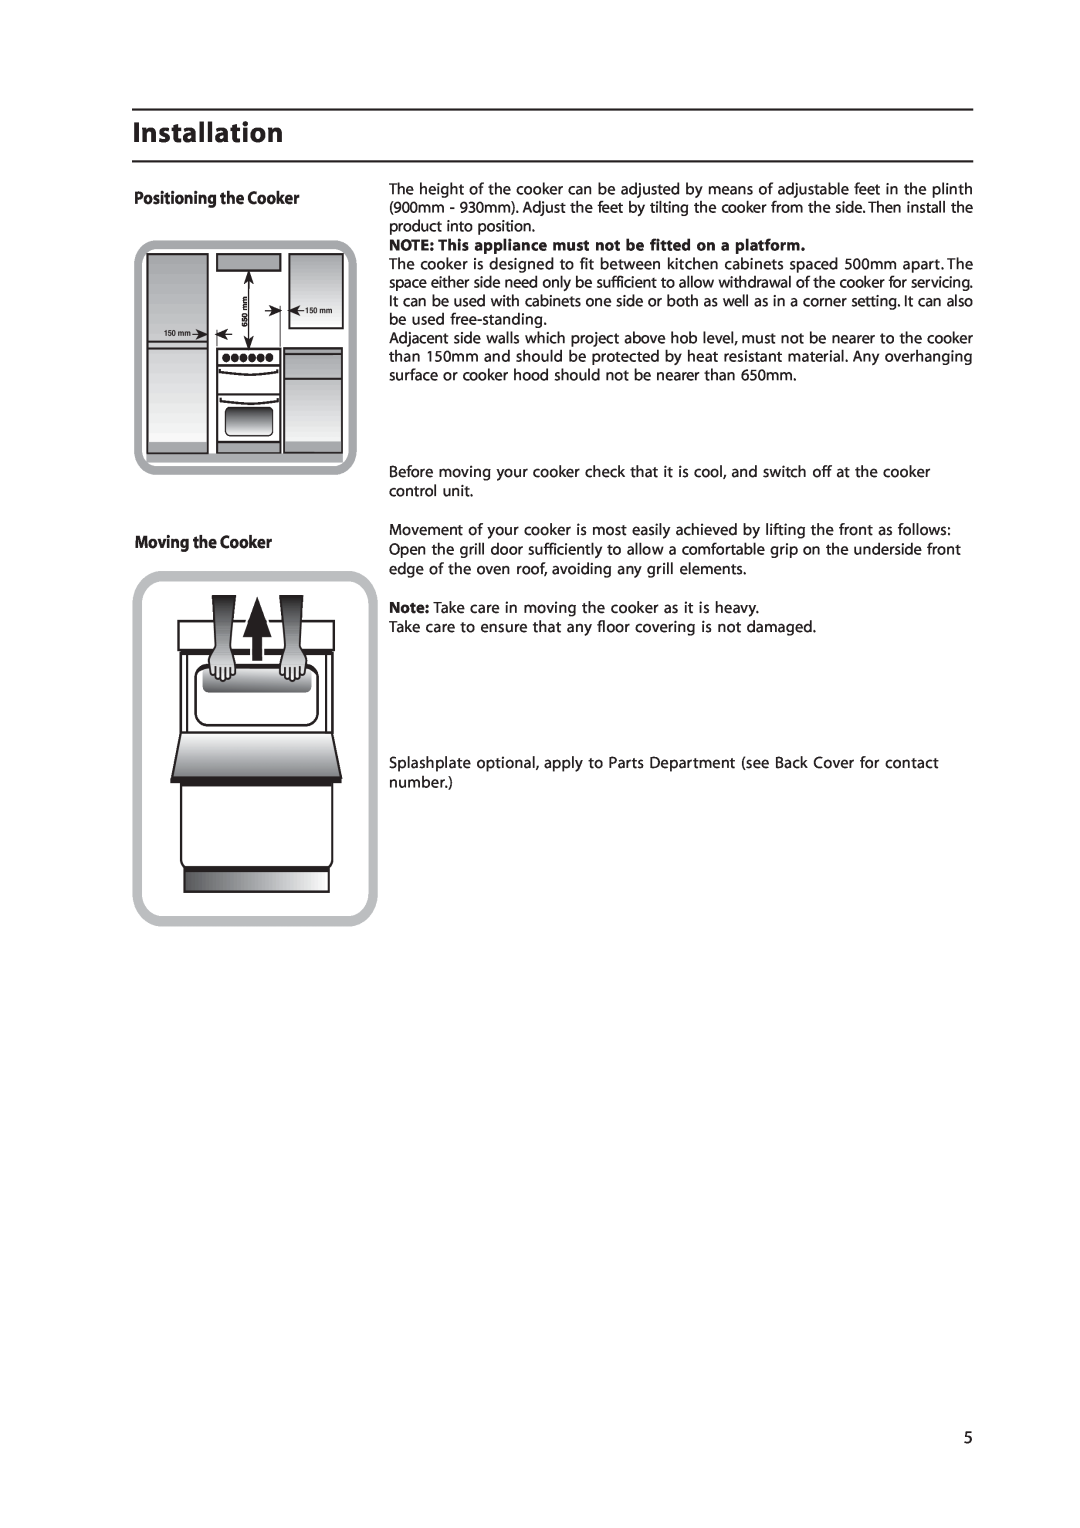 Hotpoint EW36G manual Installation, Positioning the Cooker, Moving the Cooker 